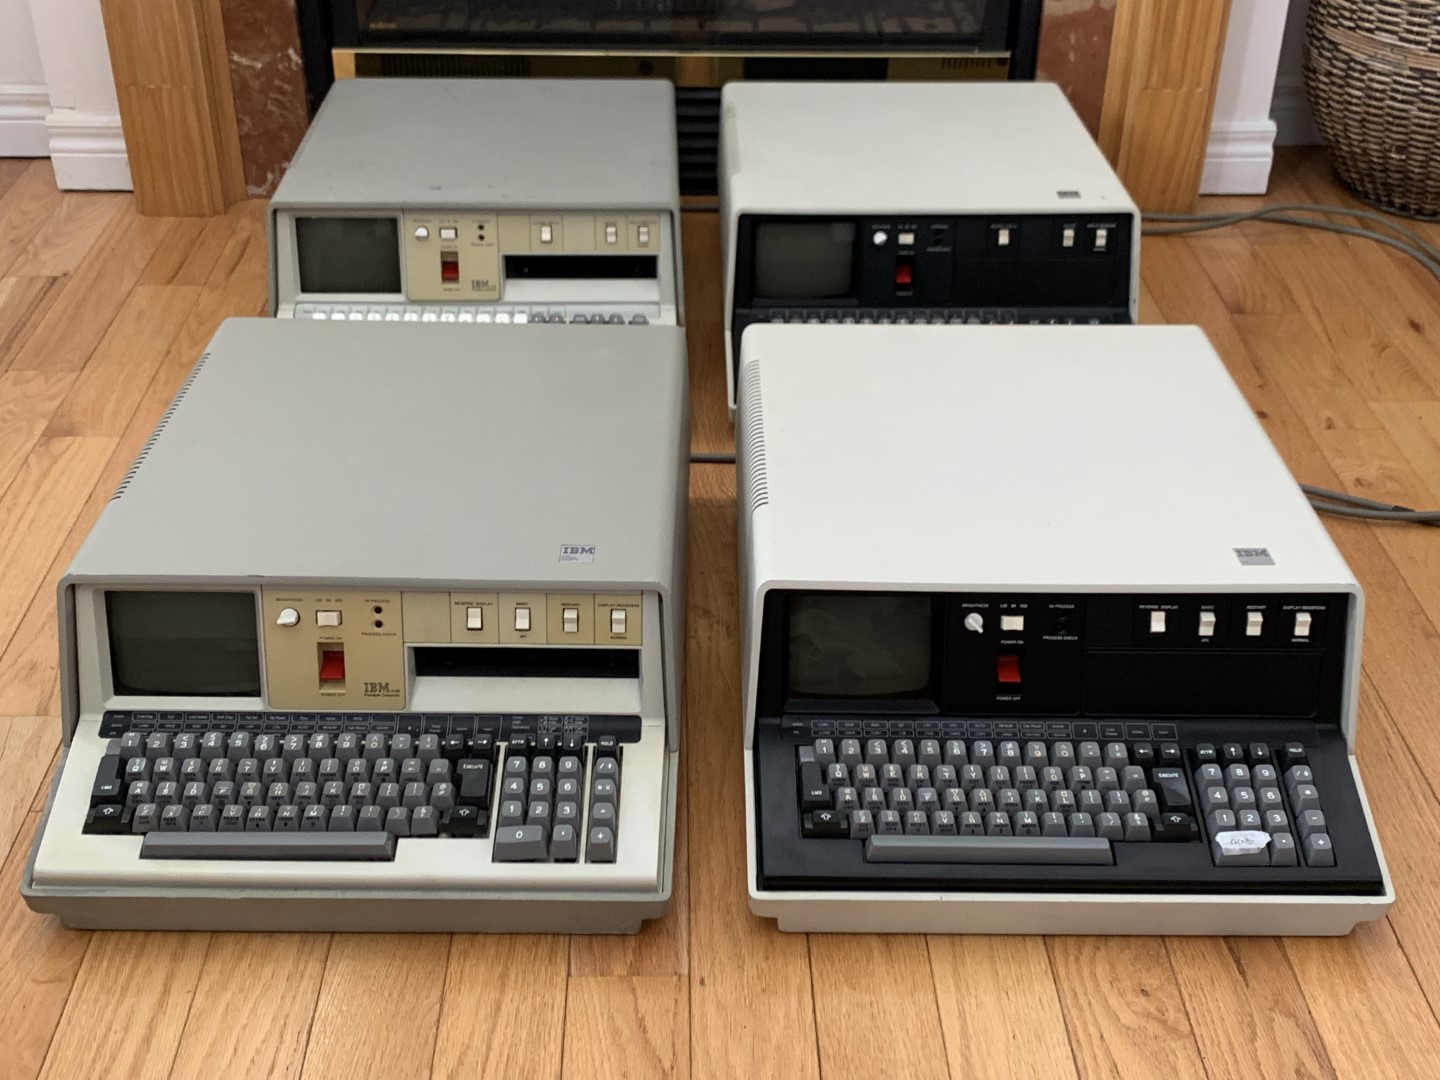 IBM 5100s and 6110s